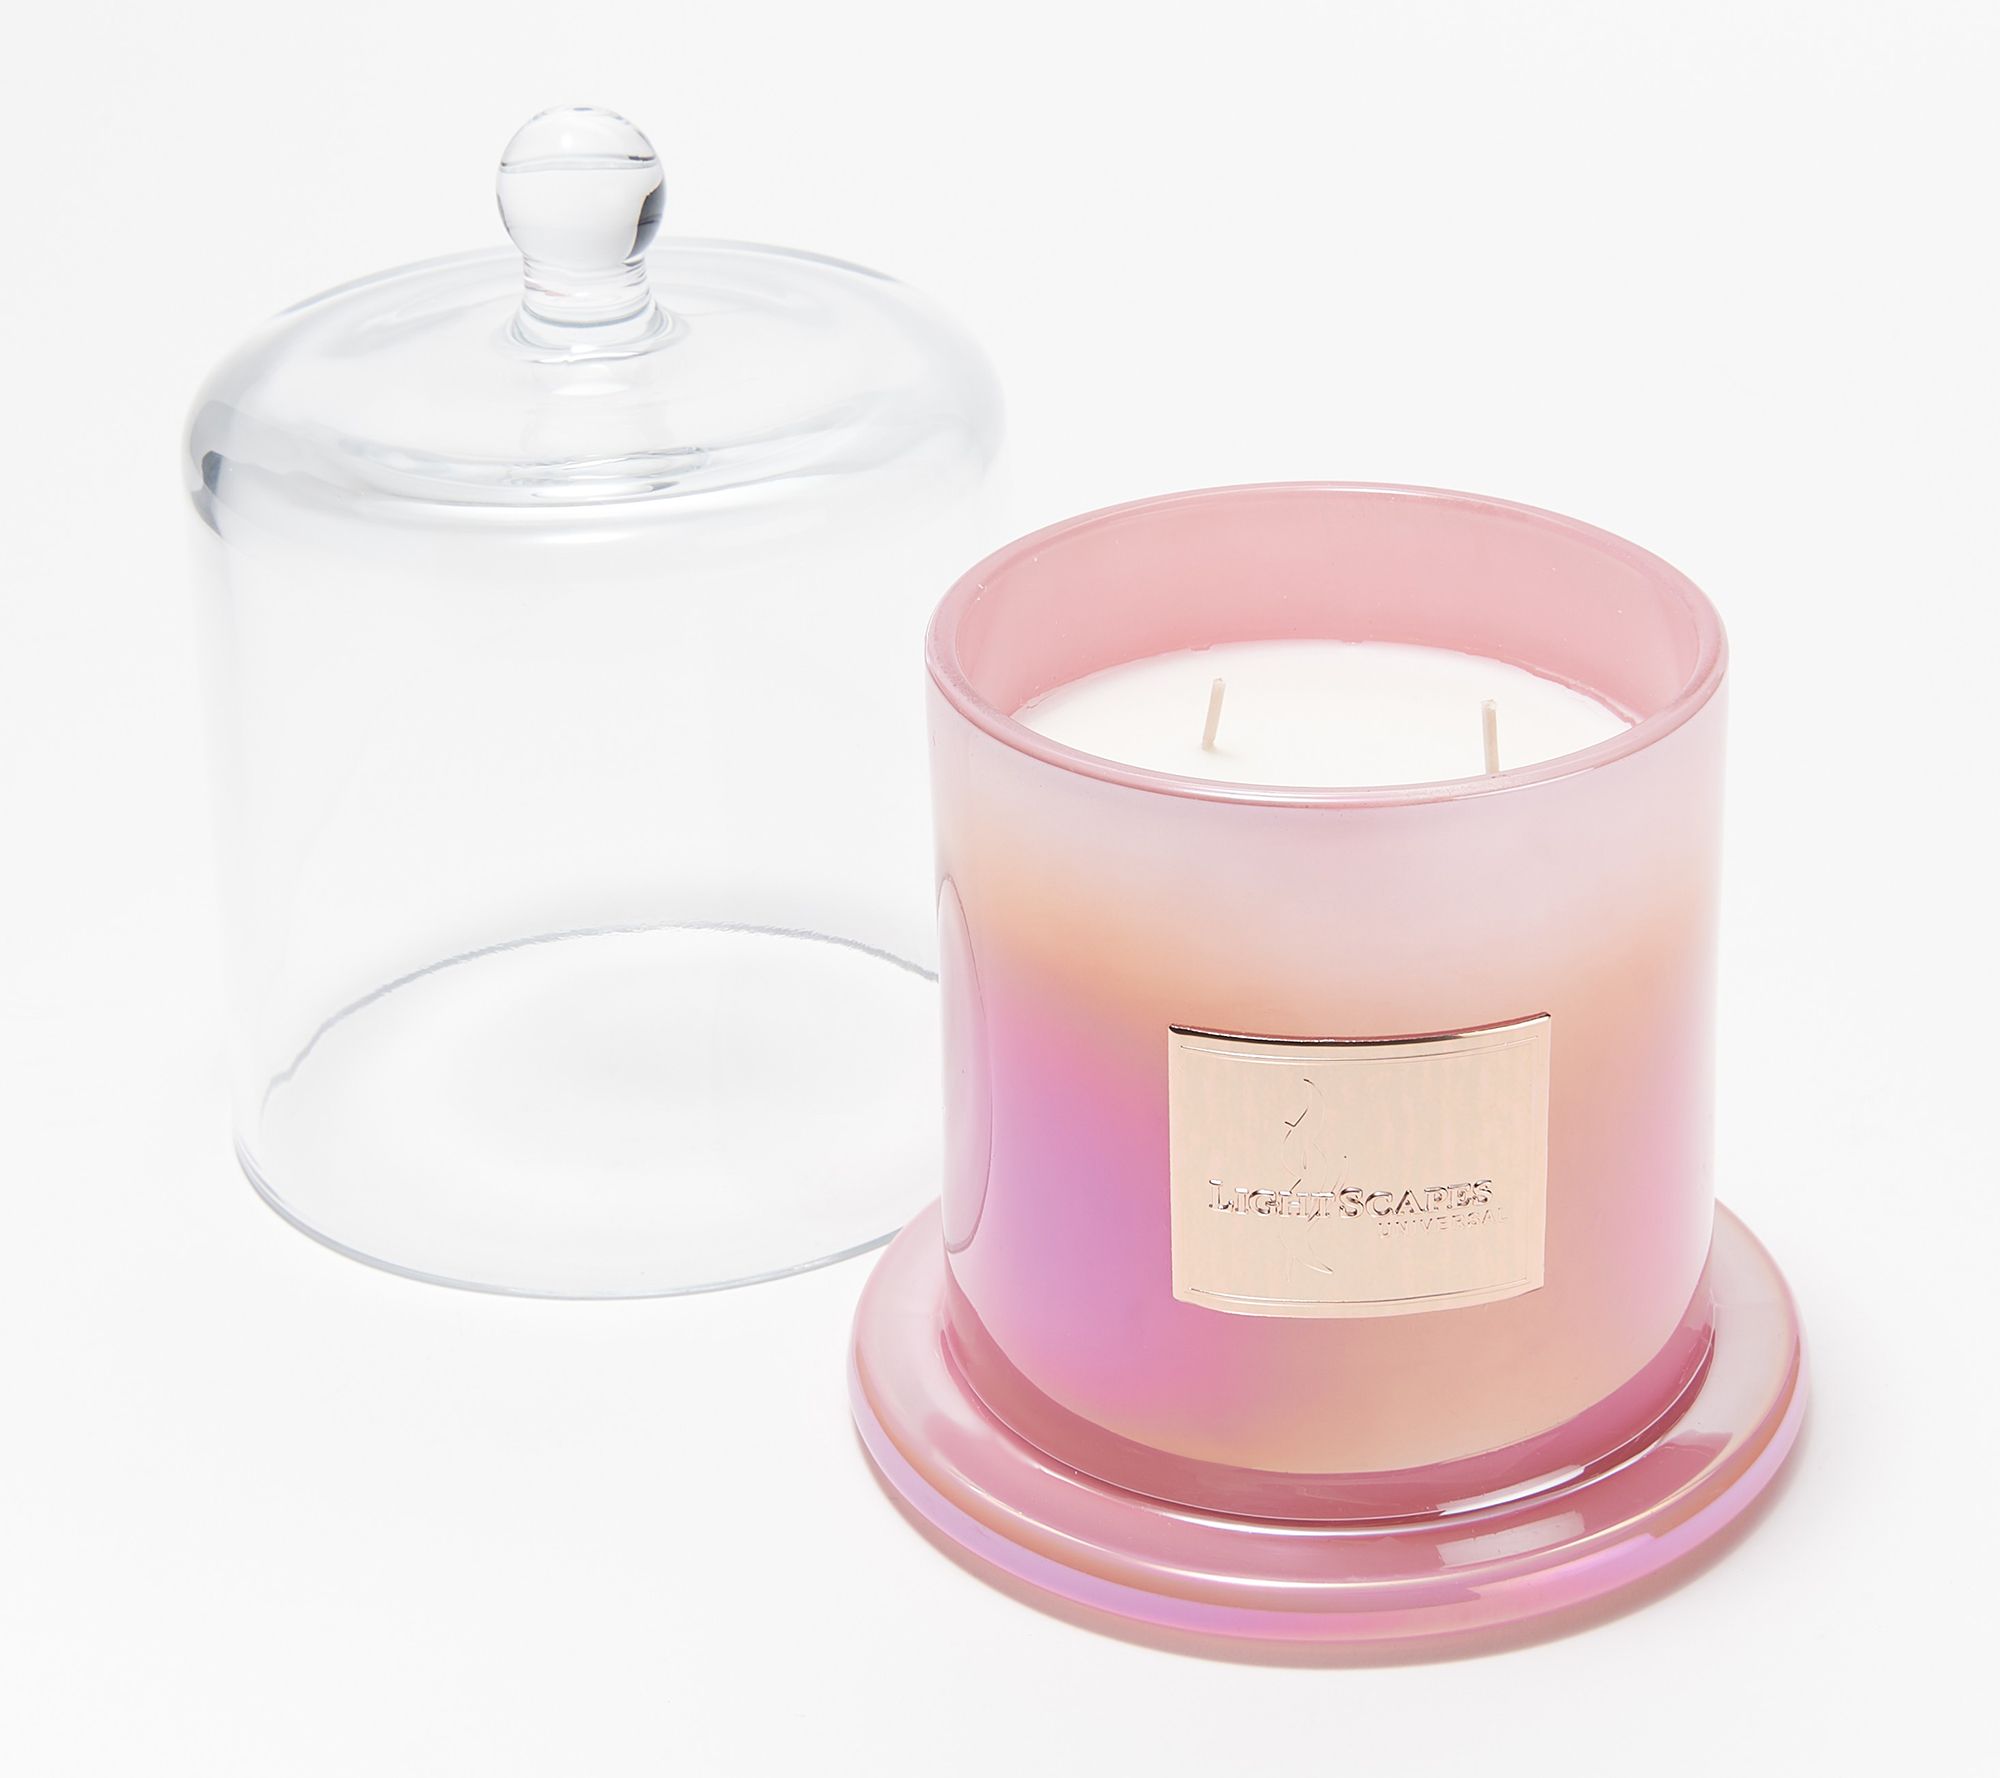 Lightscapes 18oz Glass Candle with Decorative Cloche 